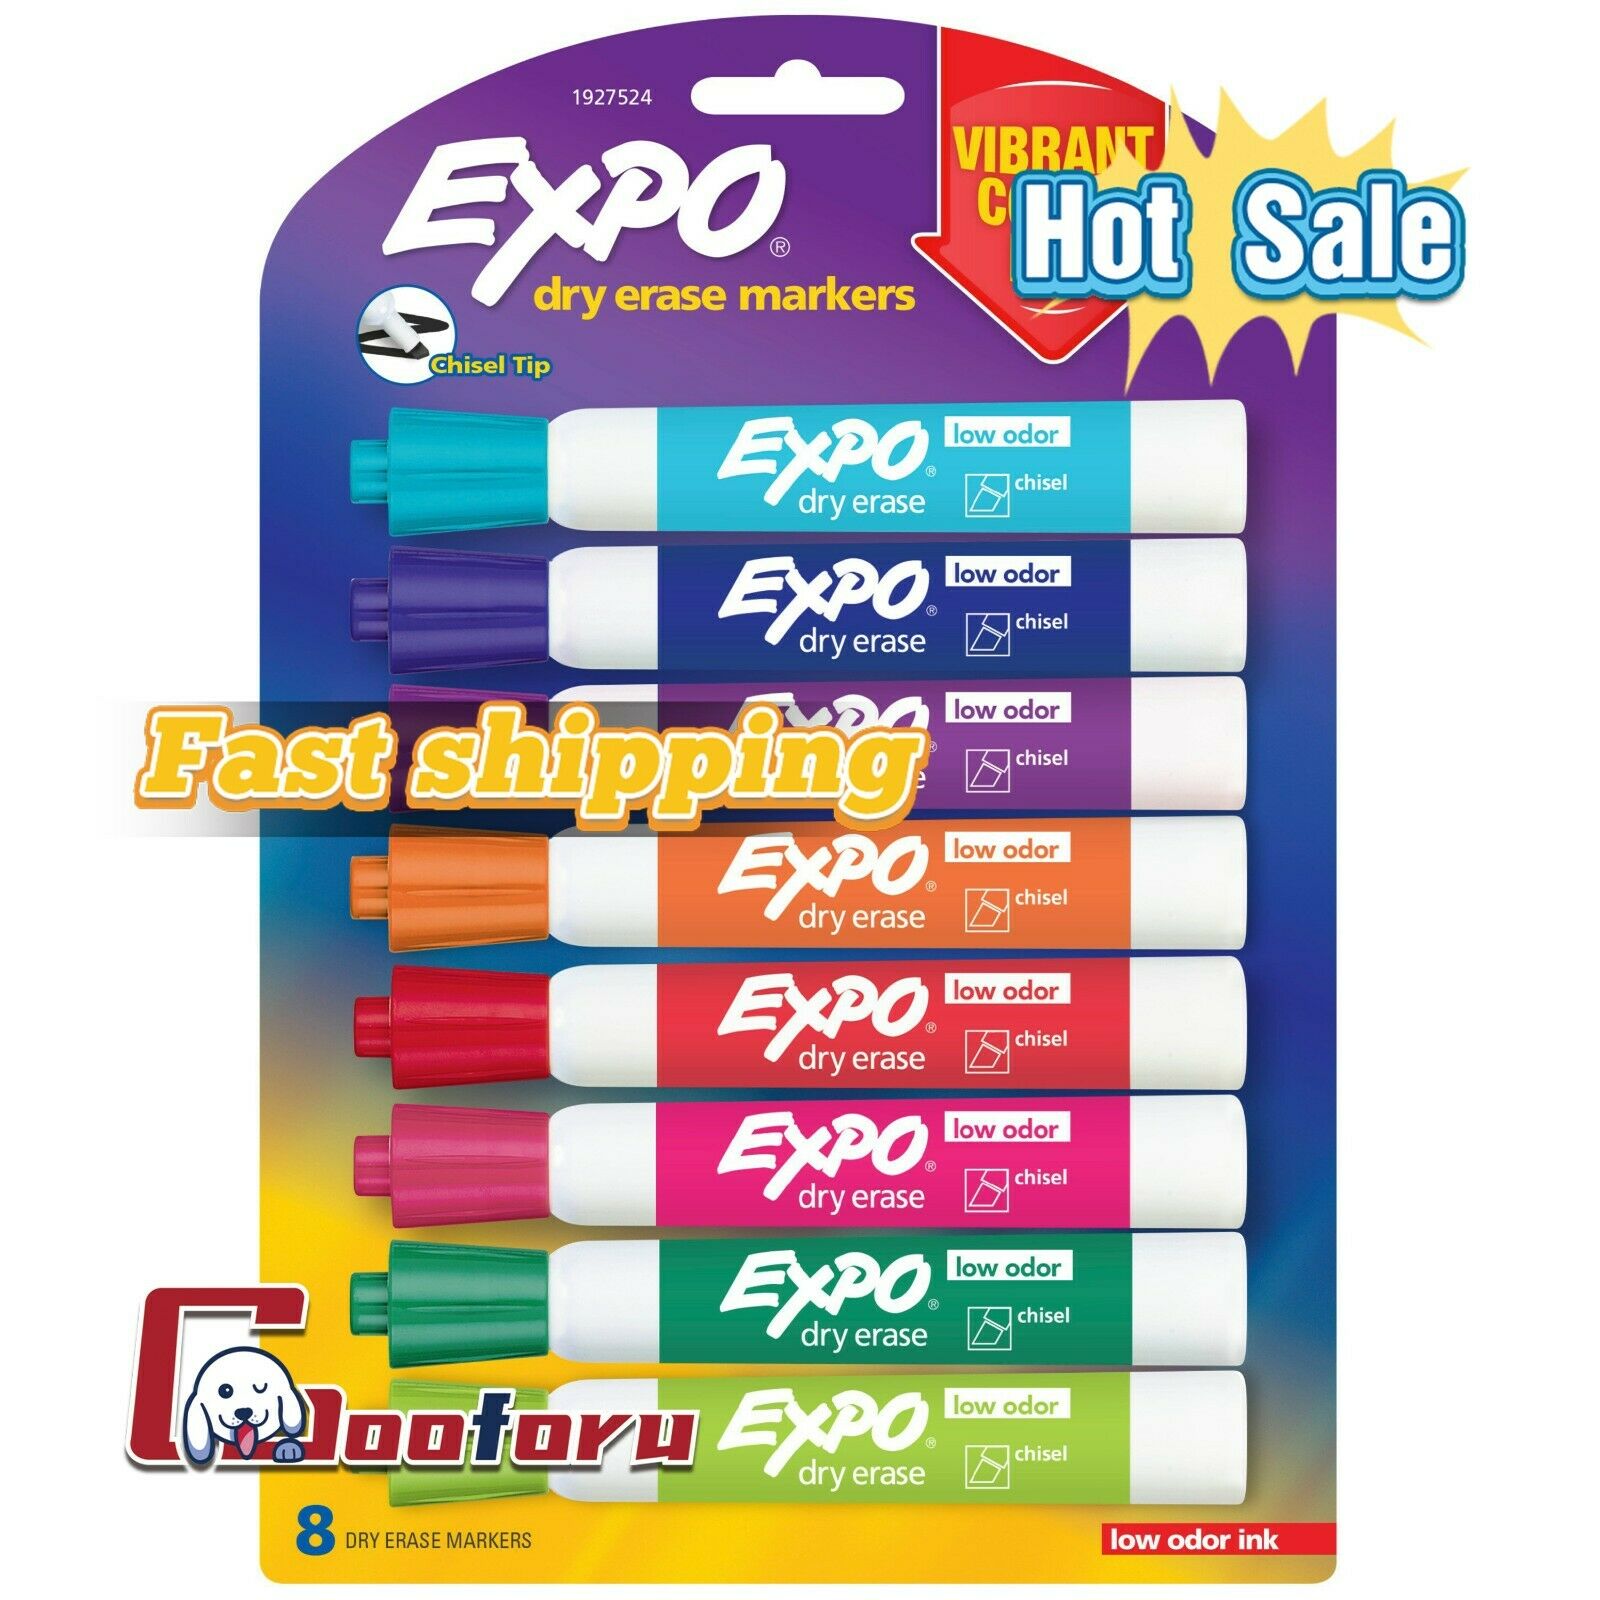 ️Expo Low Odor Dry Erase Markers, Chisel Tip, Vibrant Colors, 8 Count